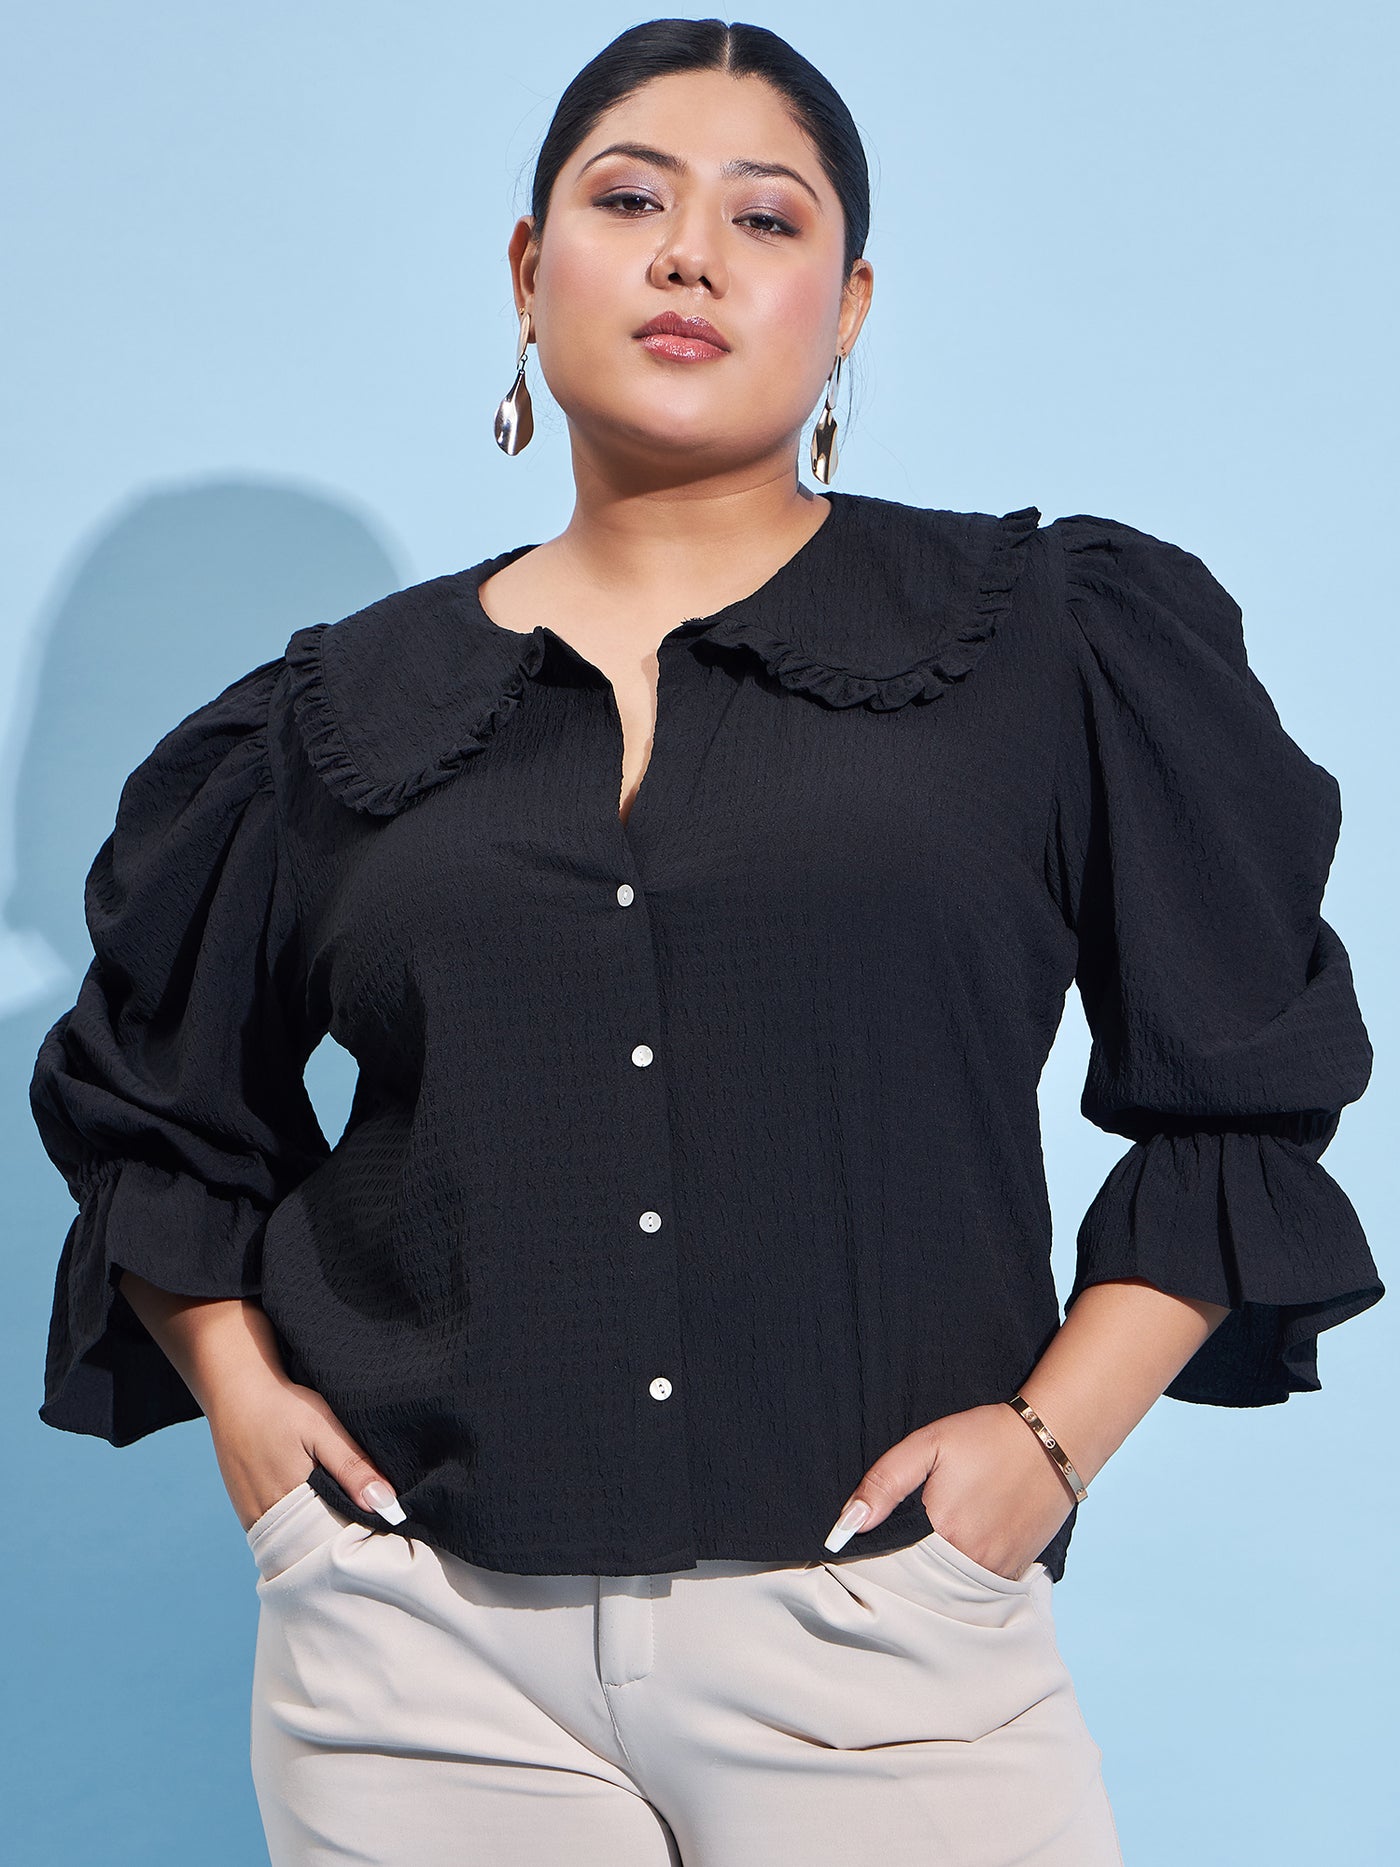 Athena Ample Plus Size Peter Pan Collar Bell Sleeve Shirt Style Top